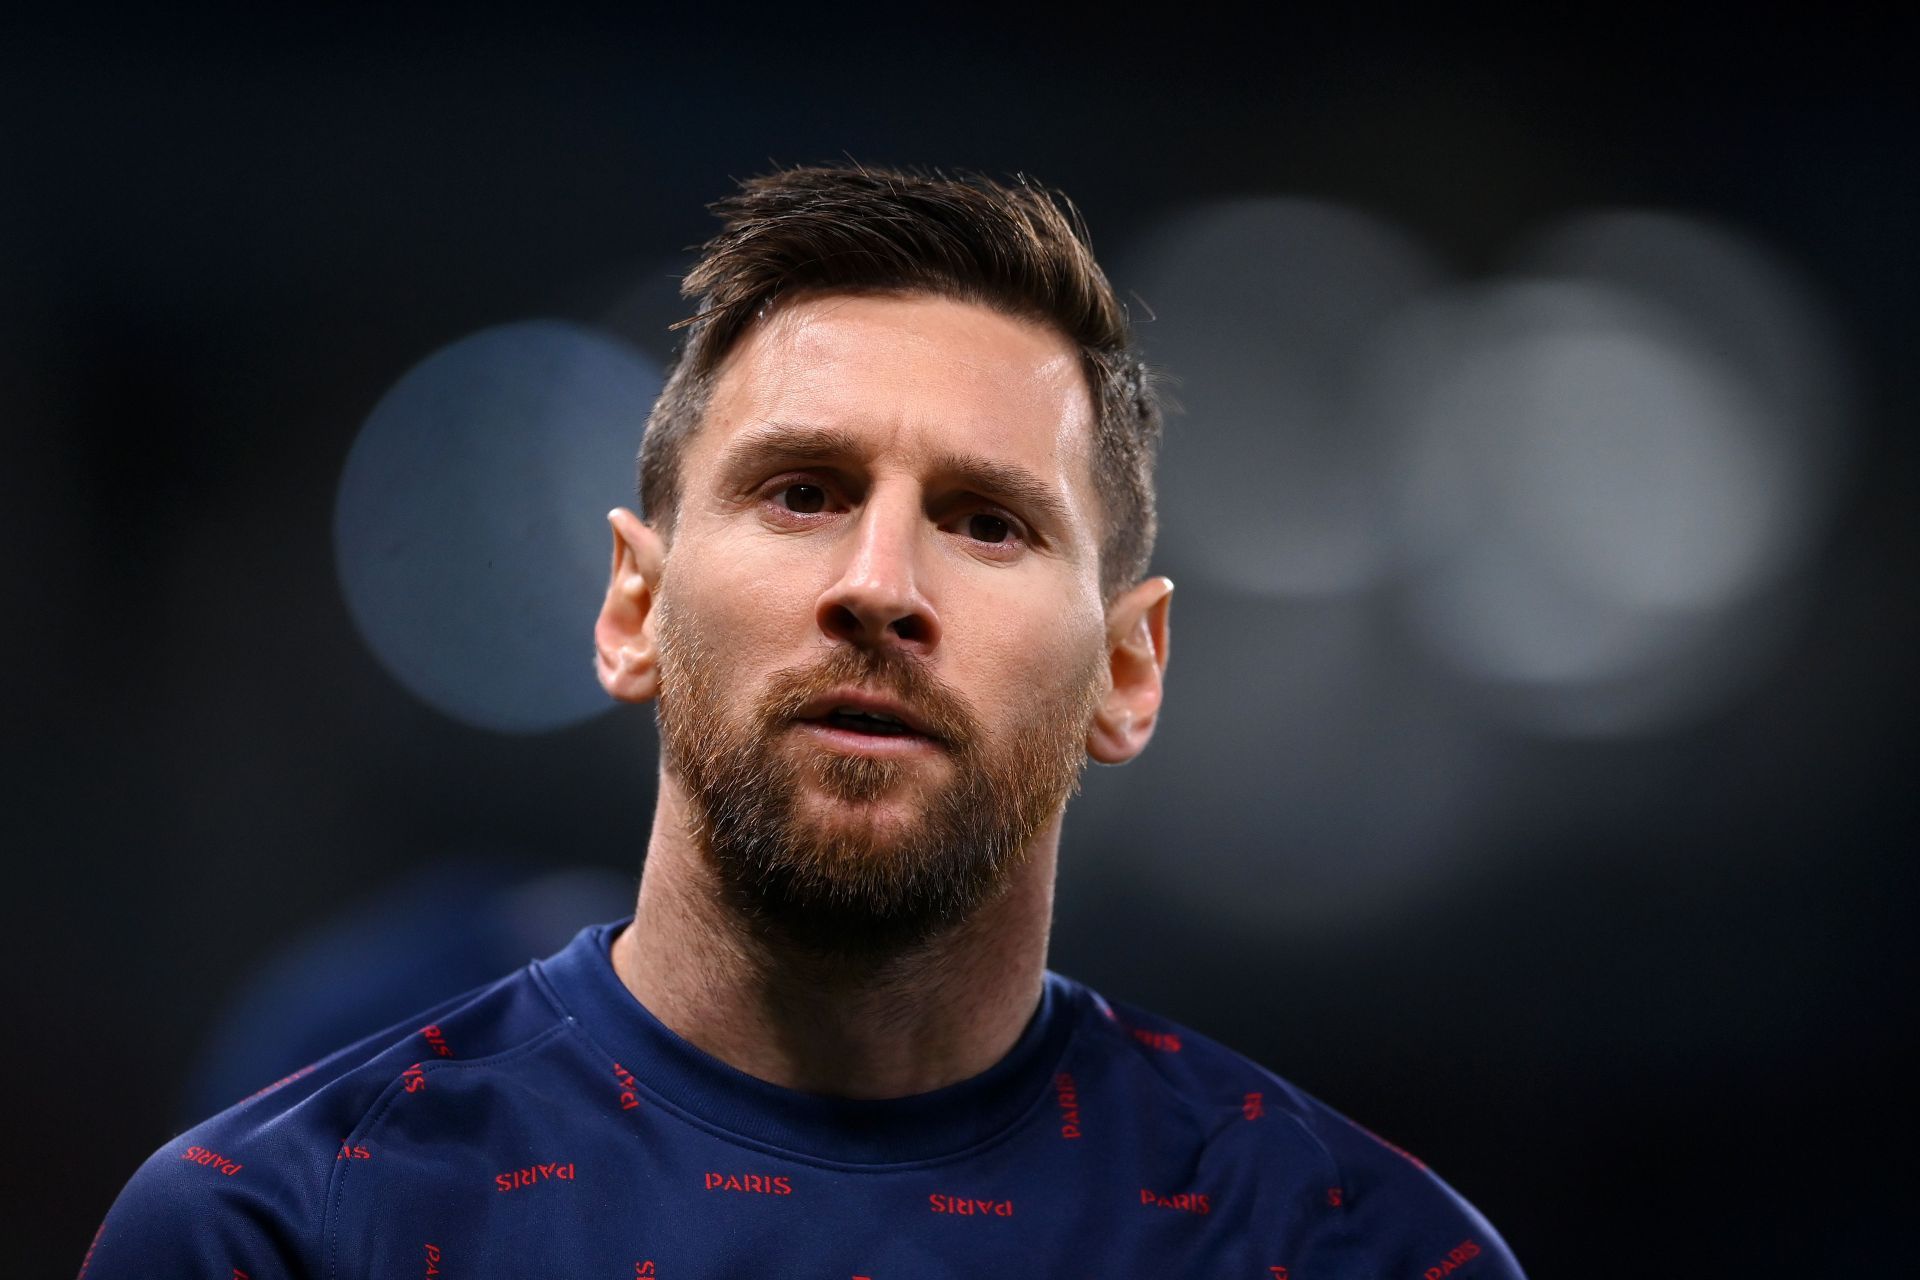 Messi has not yet hit his best at PSG